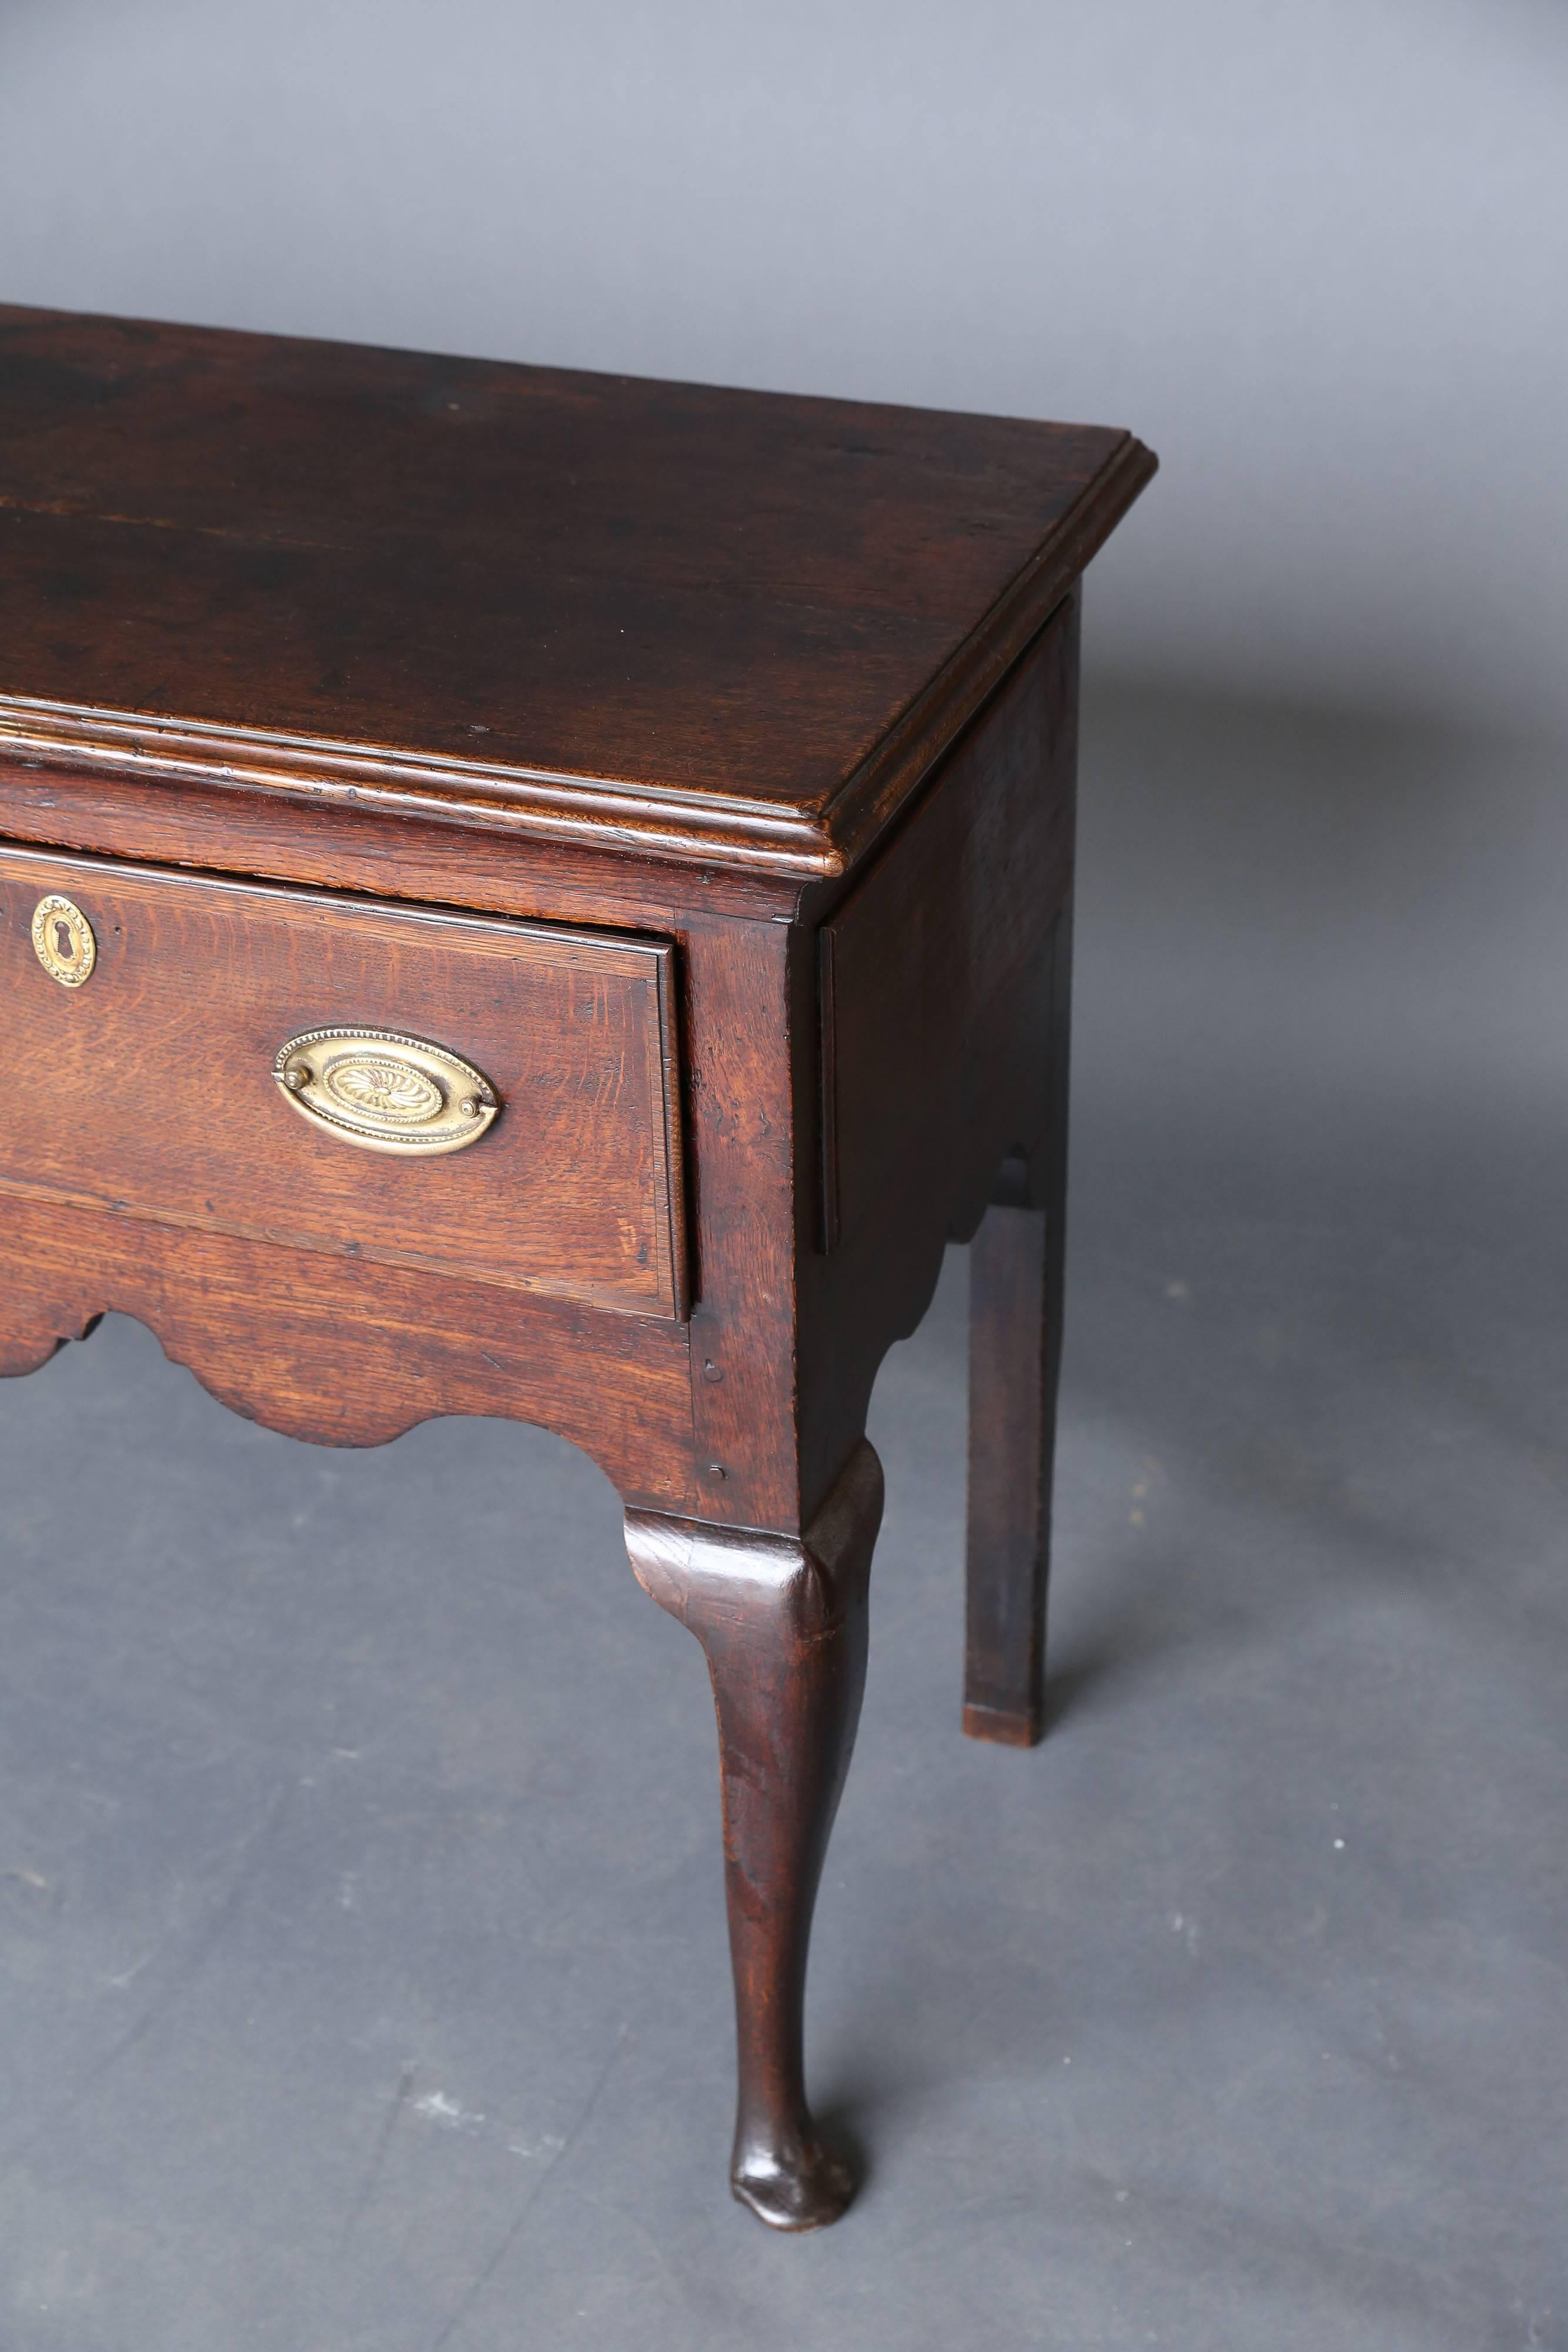 A good example of an 18th century oak serving dresser base with shaped apron standing on four cabriole legs. This three-drawer server is of good proportions and a lovely warm and rich color. This antique was produced in 1750. At the time that this